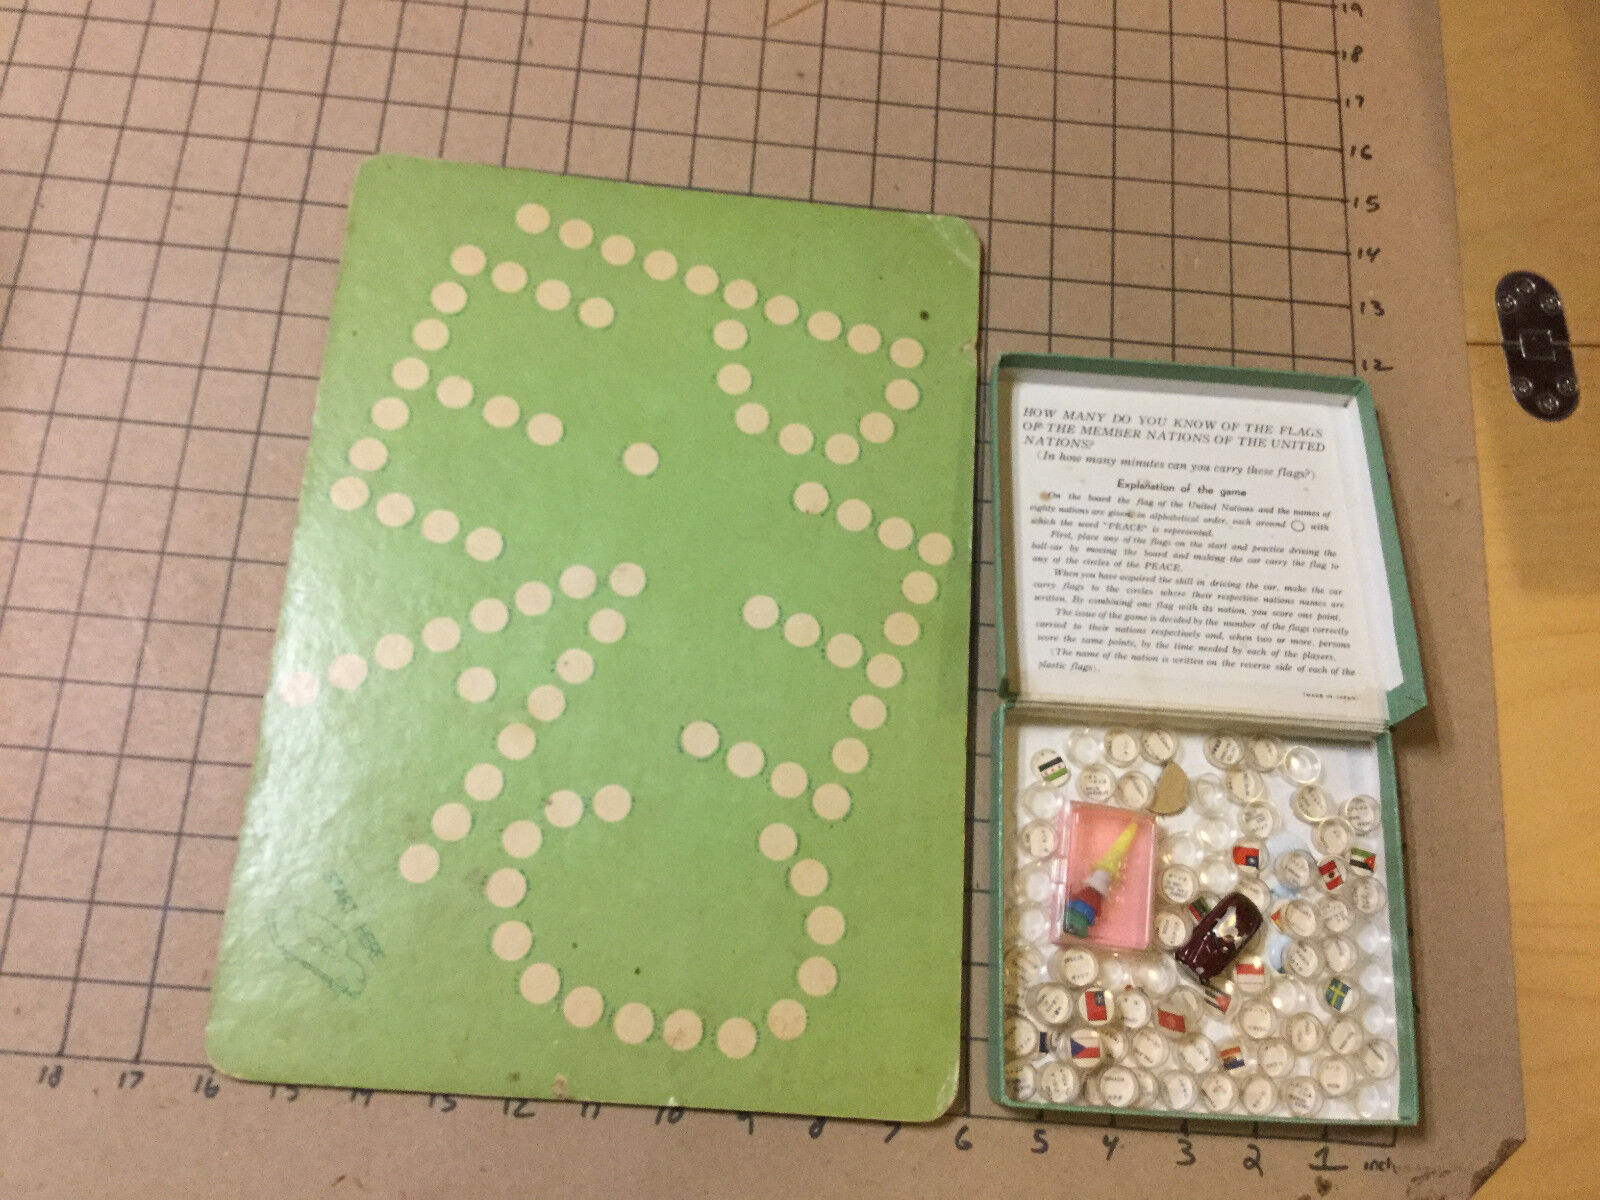 Original Vintage Game: PEACE made in Japan, with FLAGS, AND LITTLE CAR double si